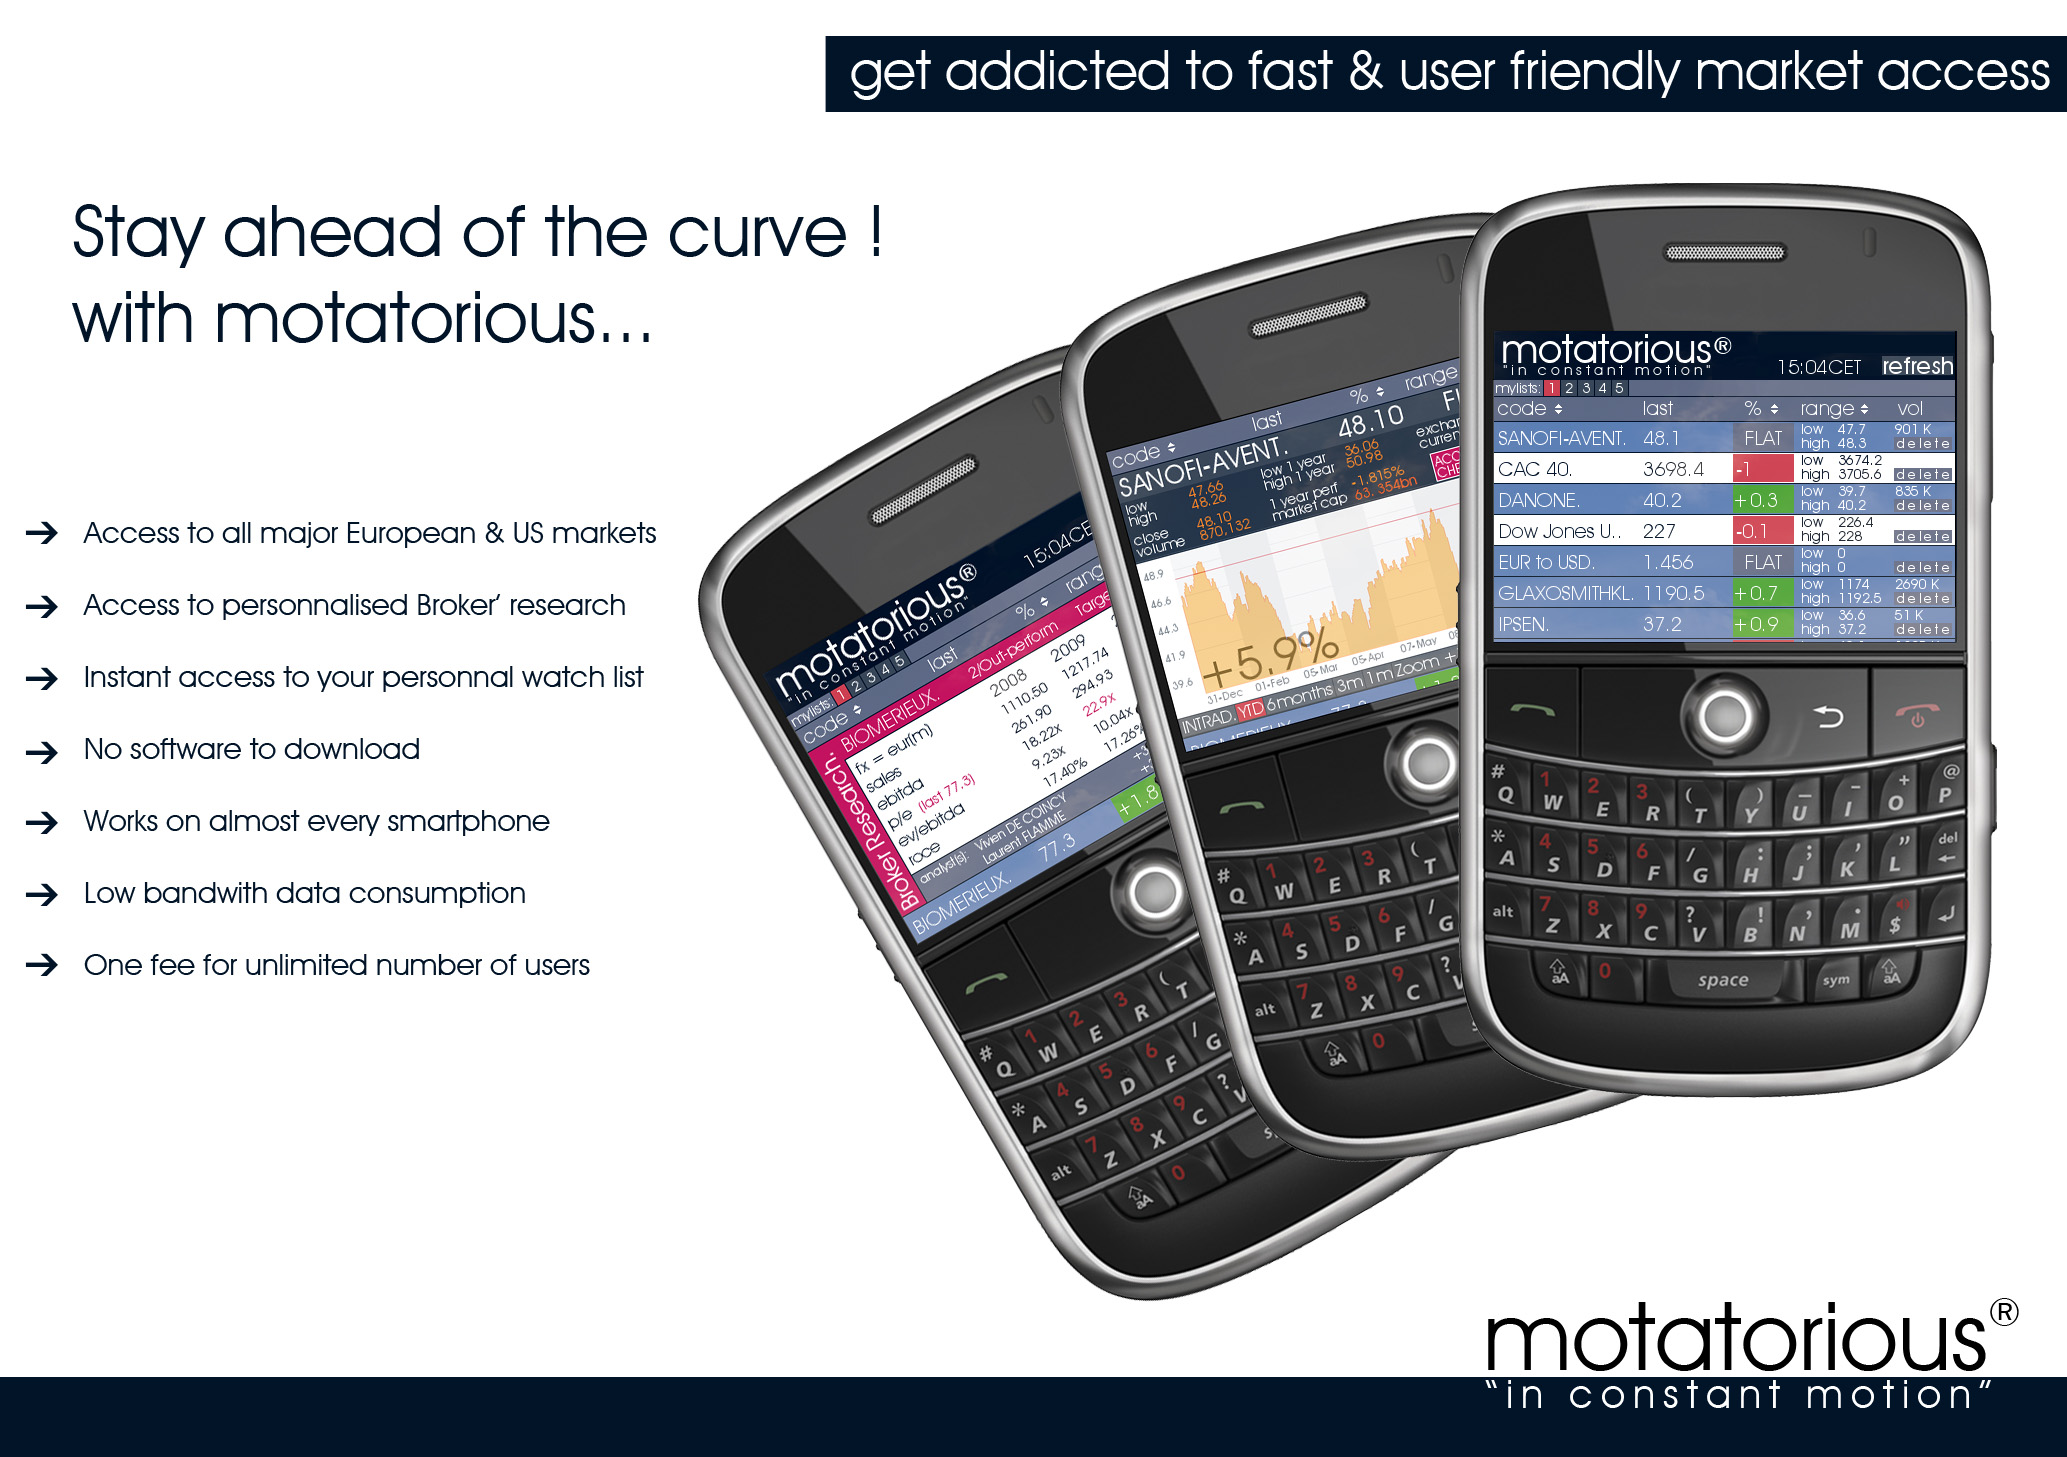 motatorious : stay ahead of the curve